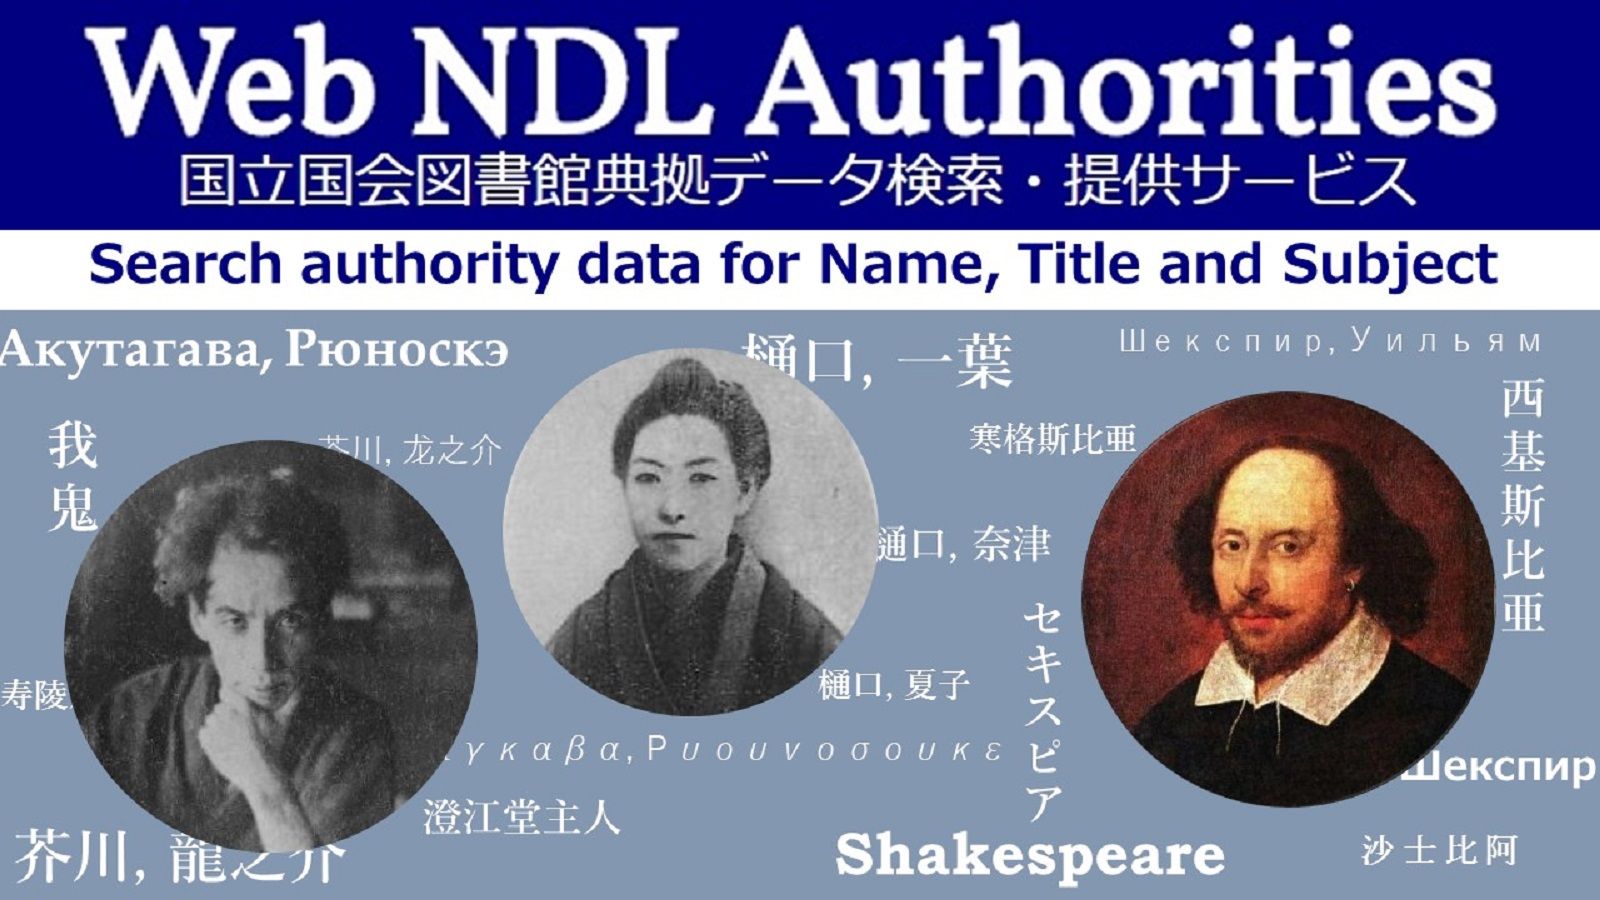 Web NDL Authorities: For accurate information retrieval